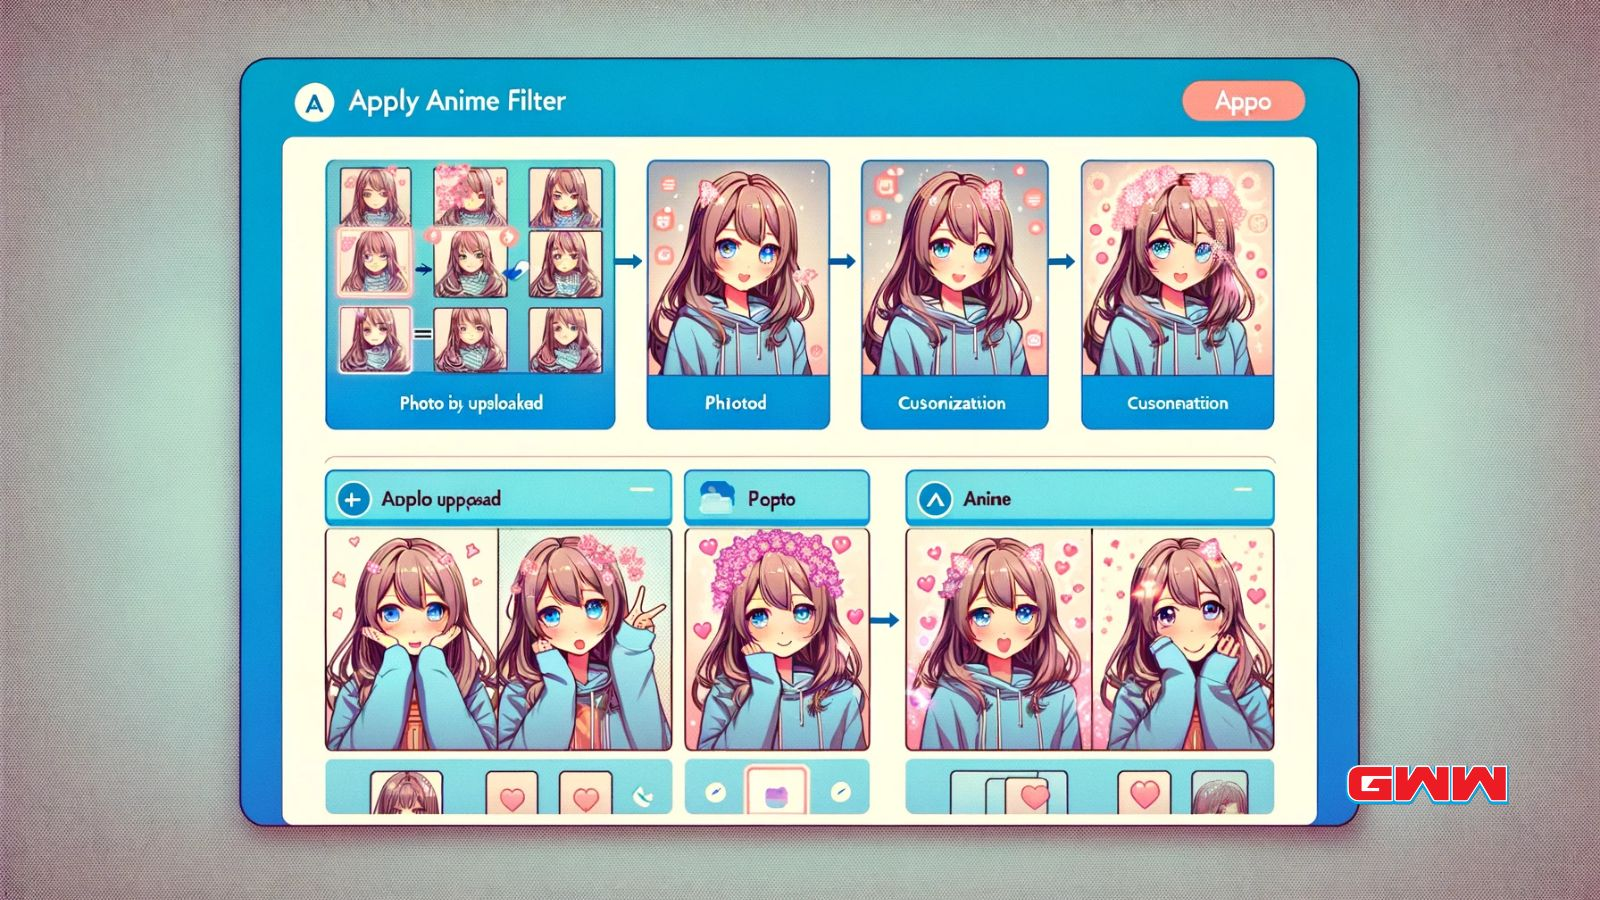 Step-by-step guide to apply anime filter to a photo.